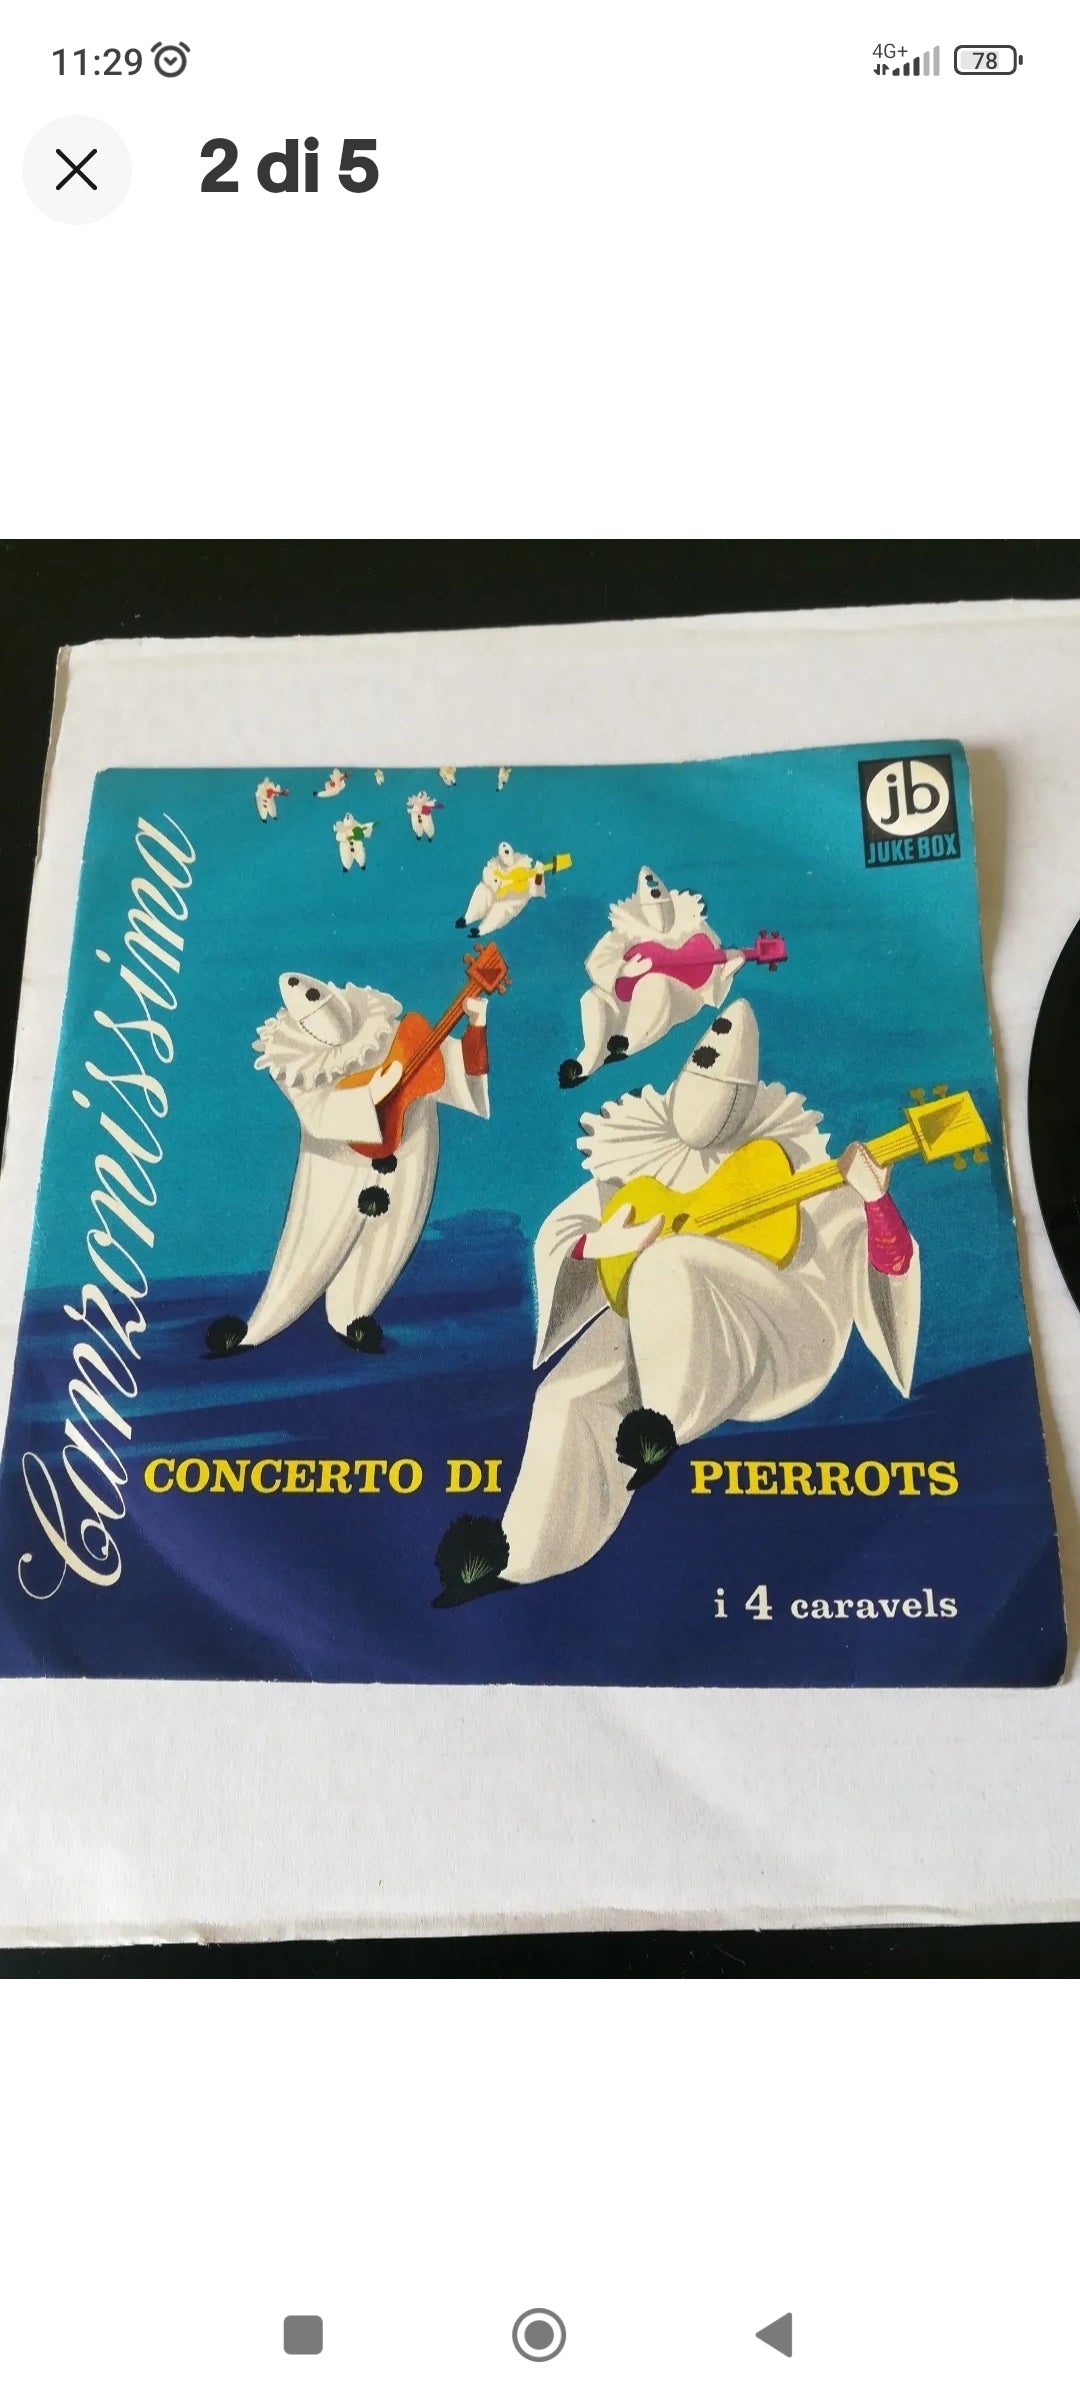 45 rpm "Pierrots Concert / With a nod you will understand" by I 4 Caravels